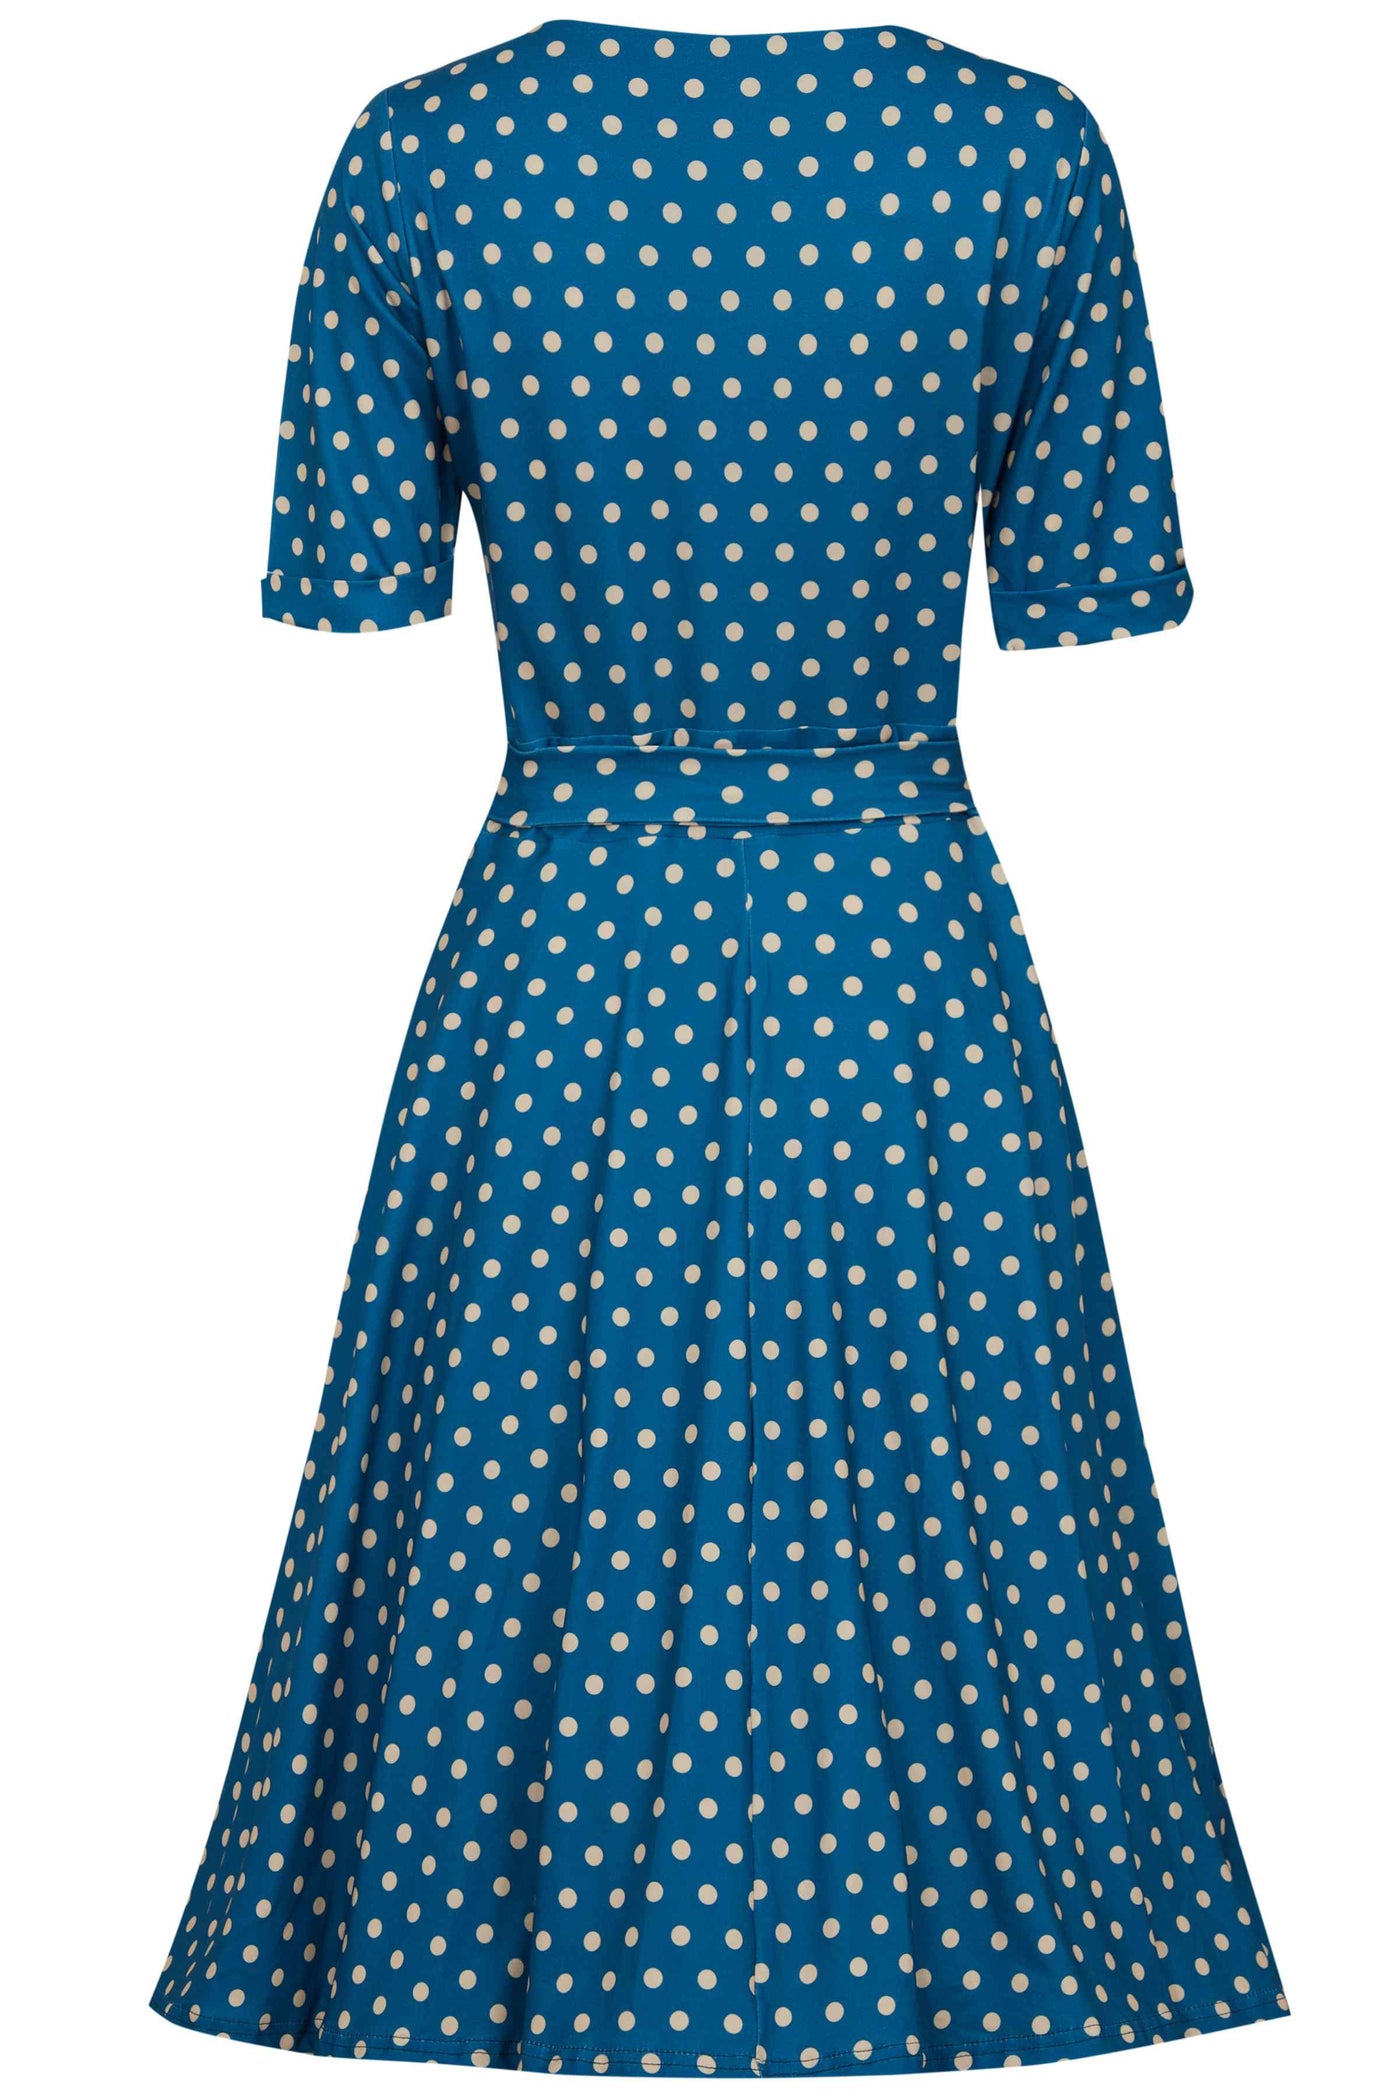 Back View of Peacock Blue and Cream Polka Dot Wrap Dress